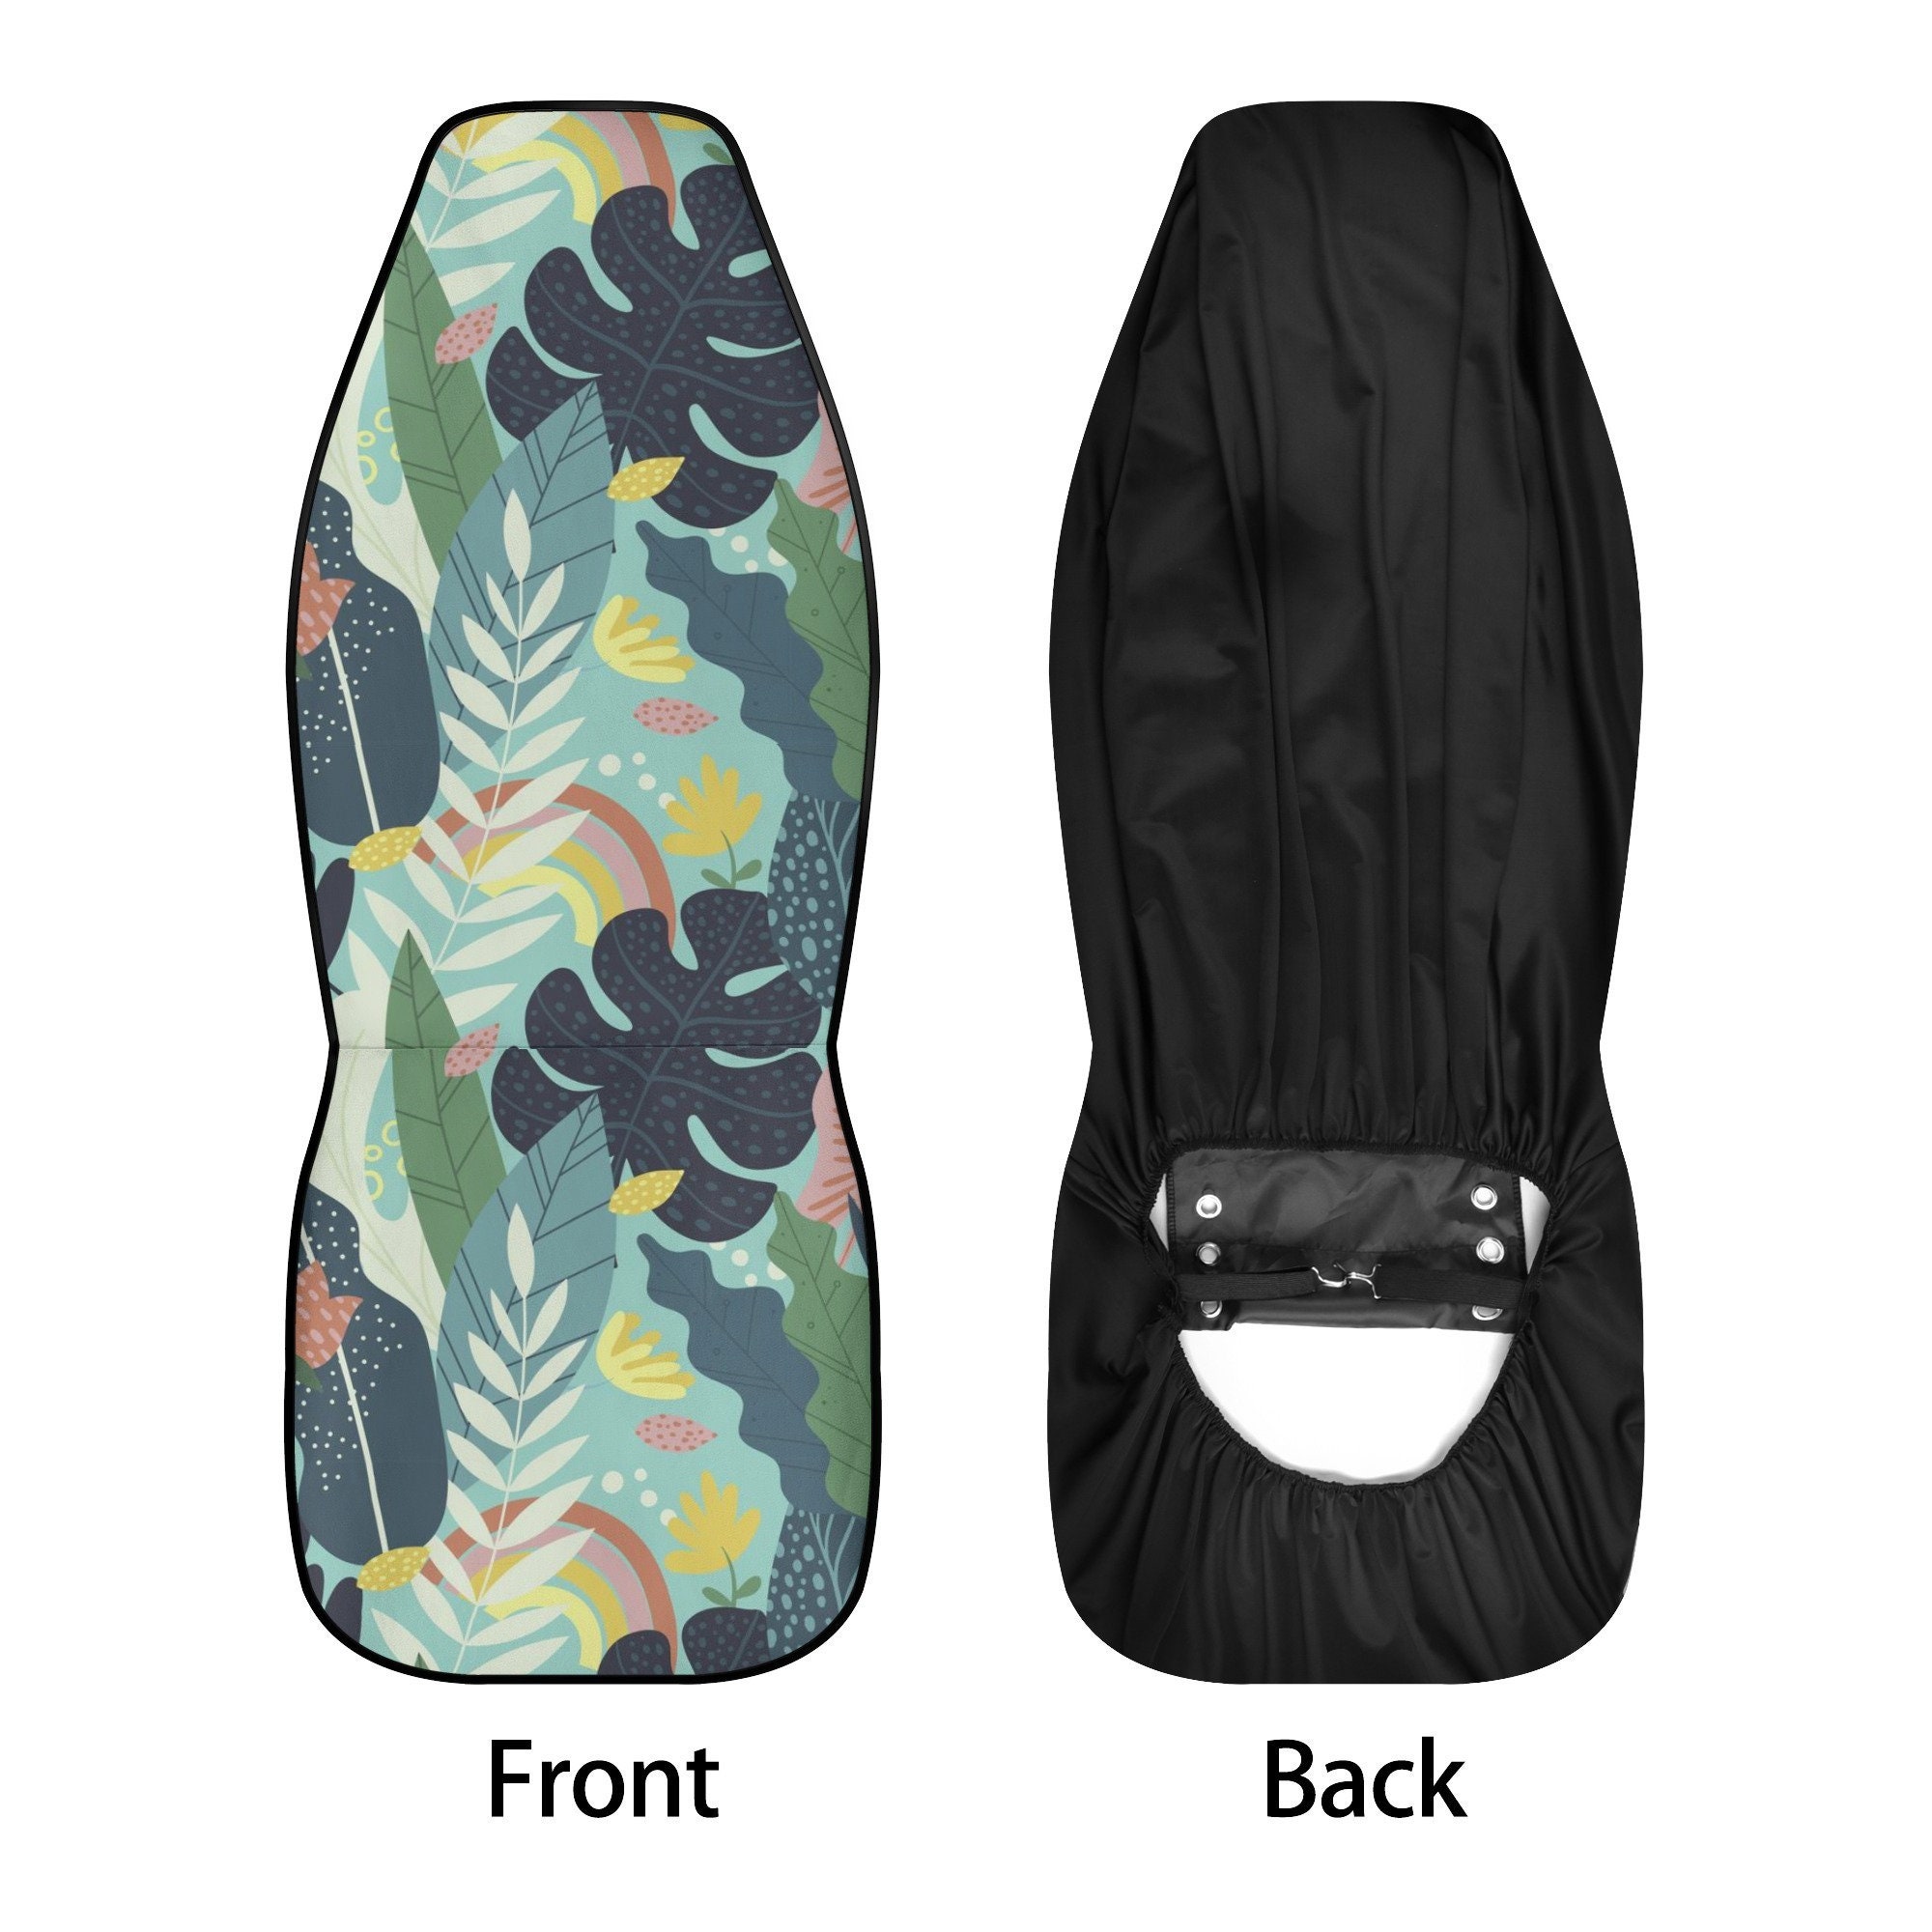 Discover Kawaii Green leaves Botanical Car Seat Covers, Cute Forest Minimlist Car Seat Cover for vehicle women Jungle car interior decor accessories